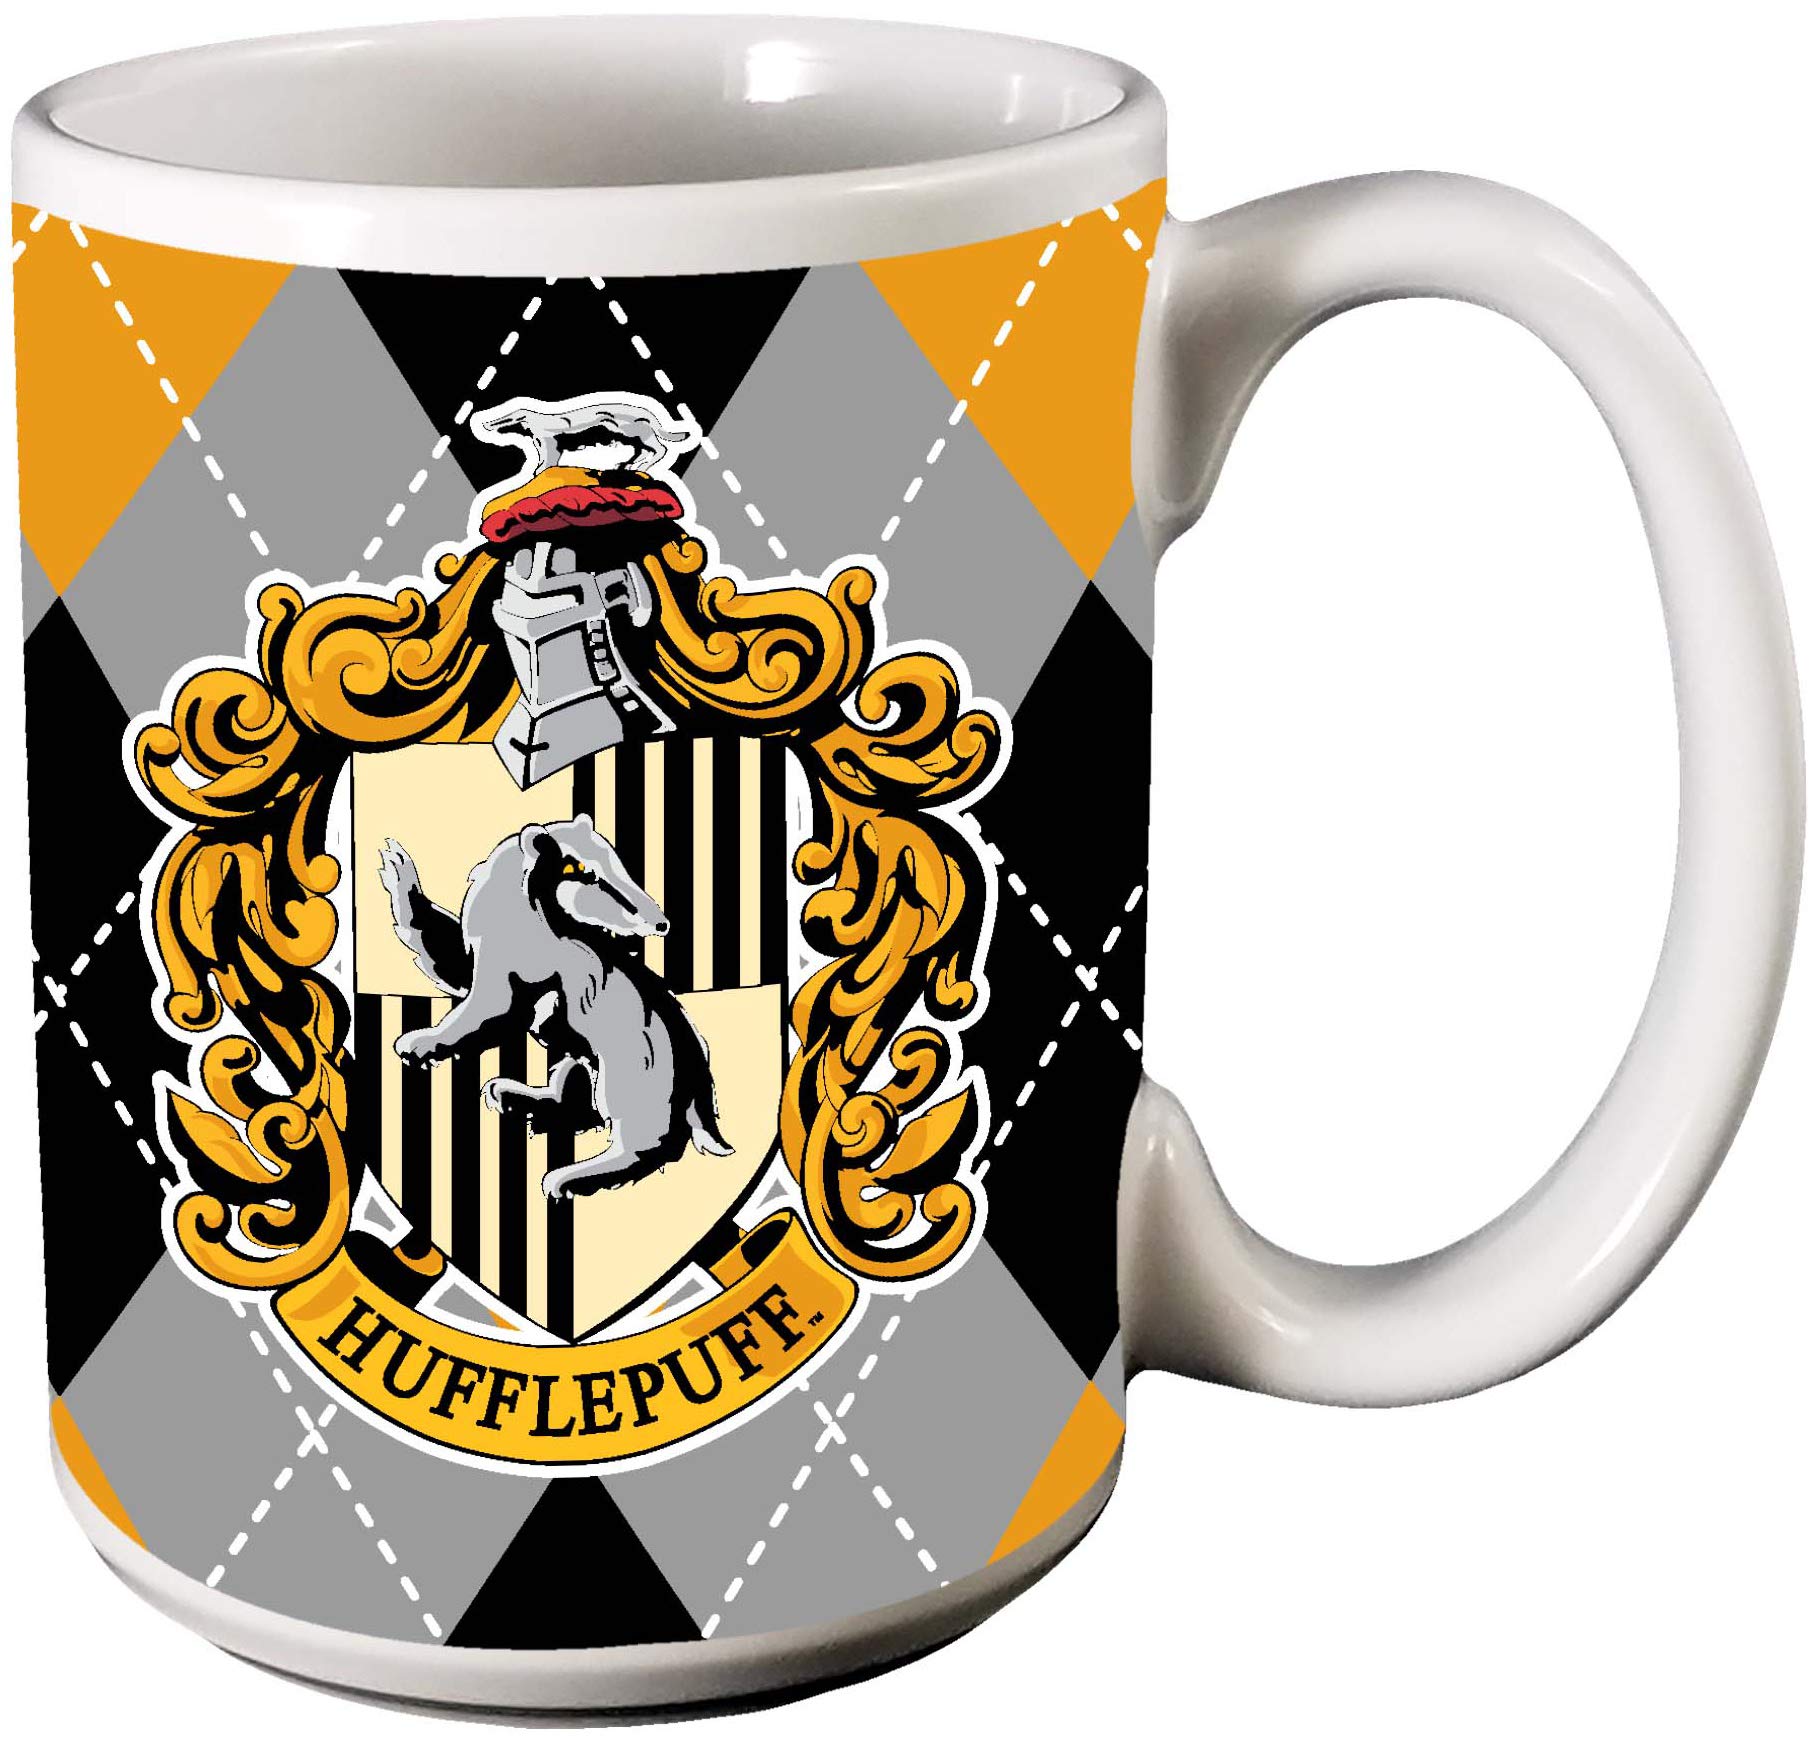 Spoontiques Harry Potter Ceramic Coffee Mug for Hot & Cold Beverages - Cute Mug for Coffee Lovers, 12 Oz - Hufflepuff